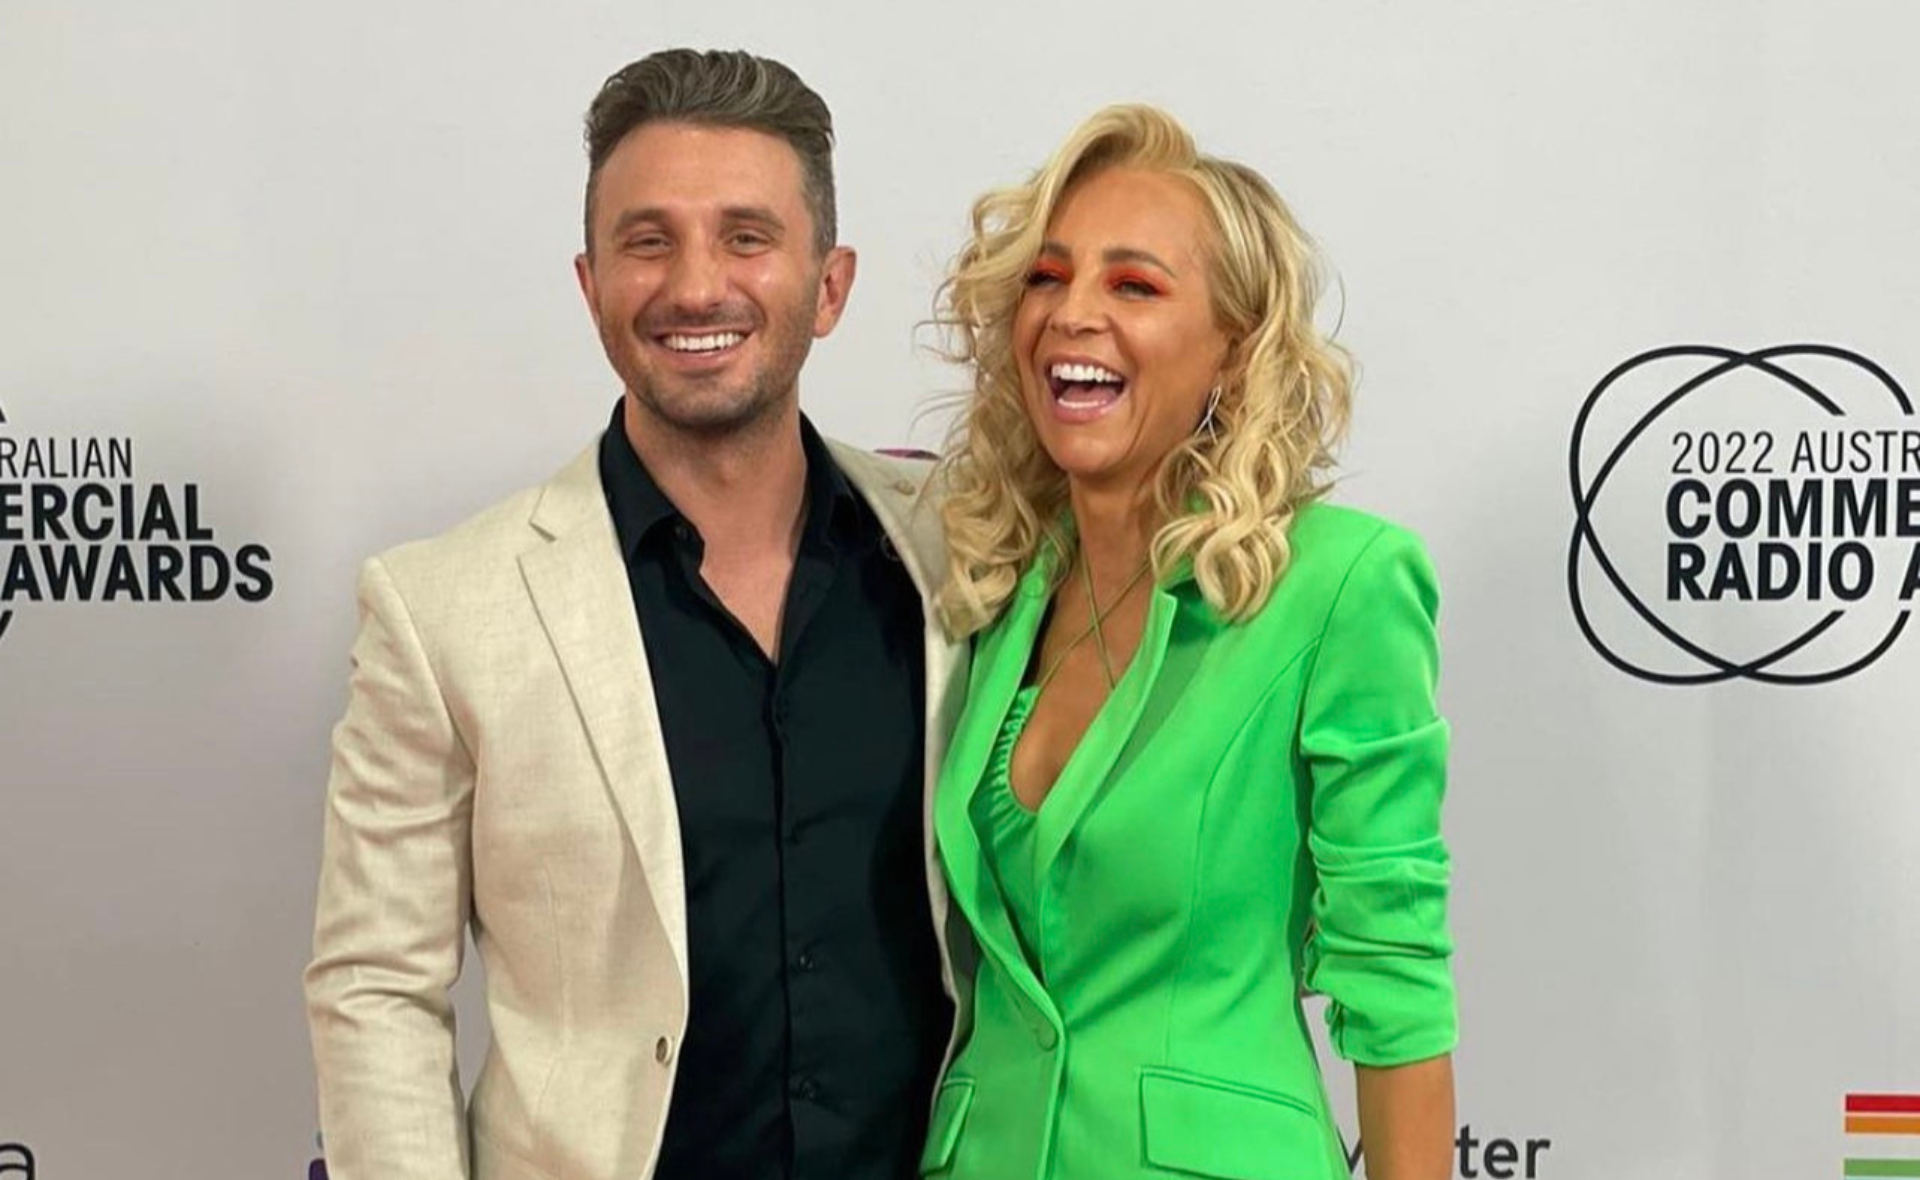 Rumours surrounding Carrie Bickmore and Tommy Little’s potential romantic connection resurface